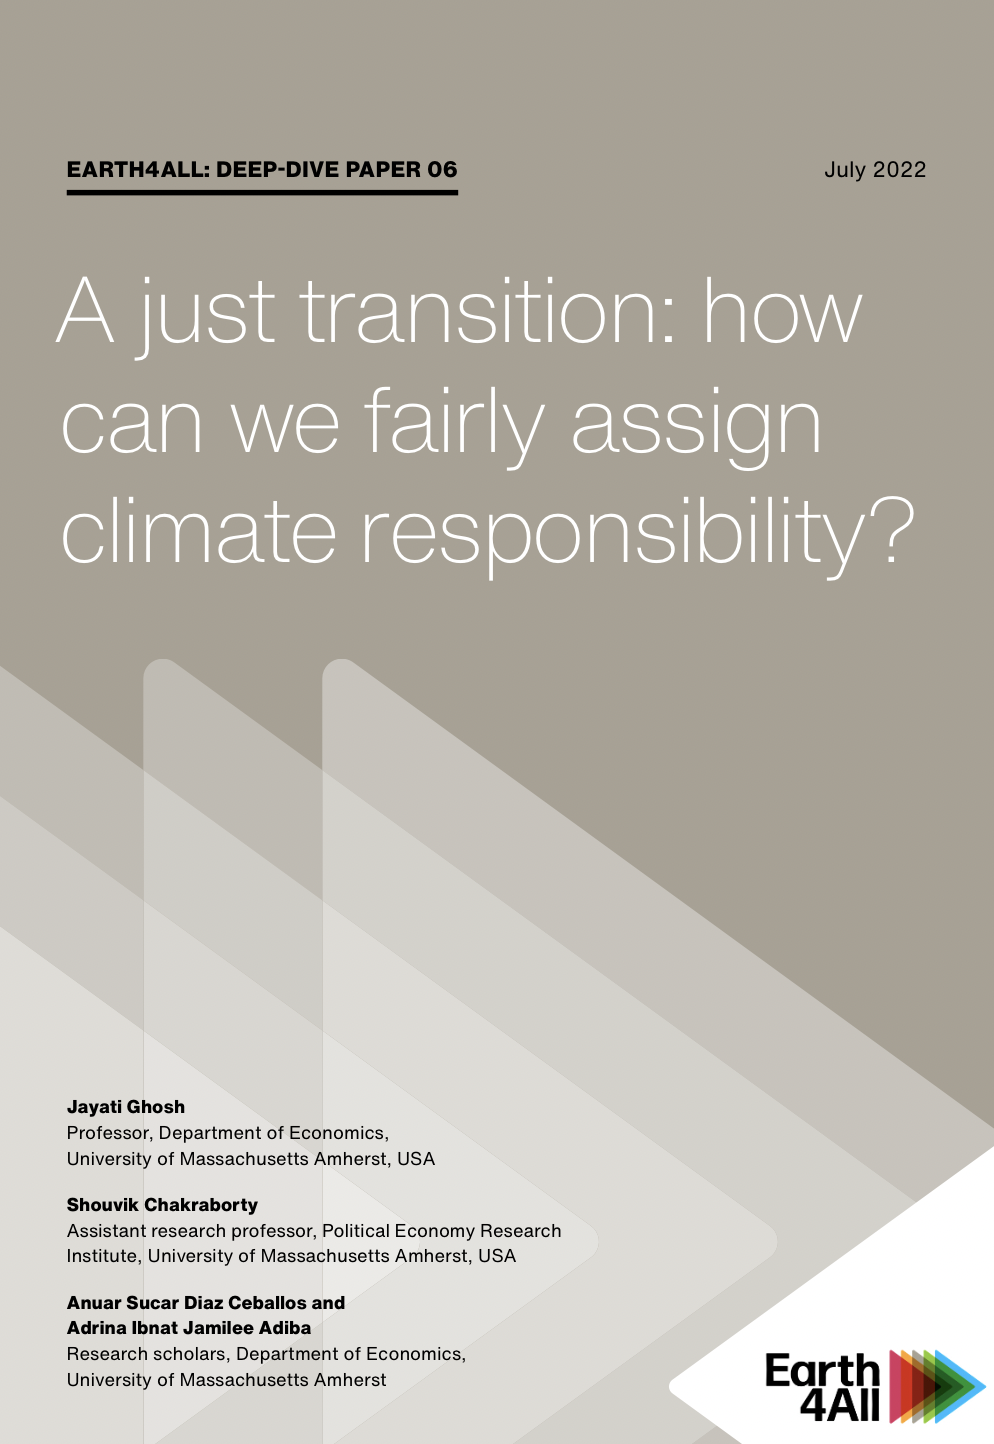 A just transition: how can we fairly assign climate responsibility?